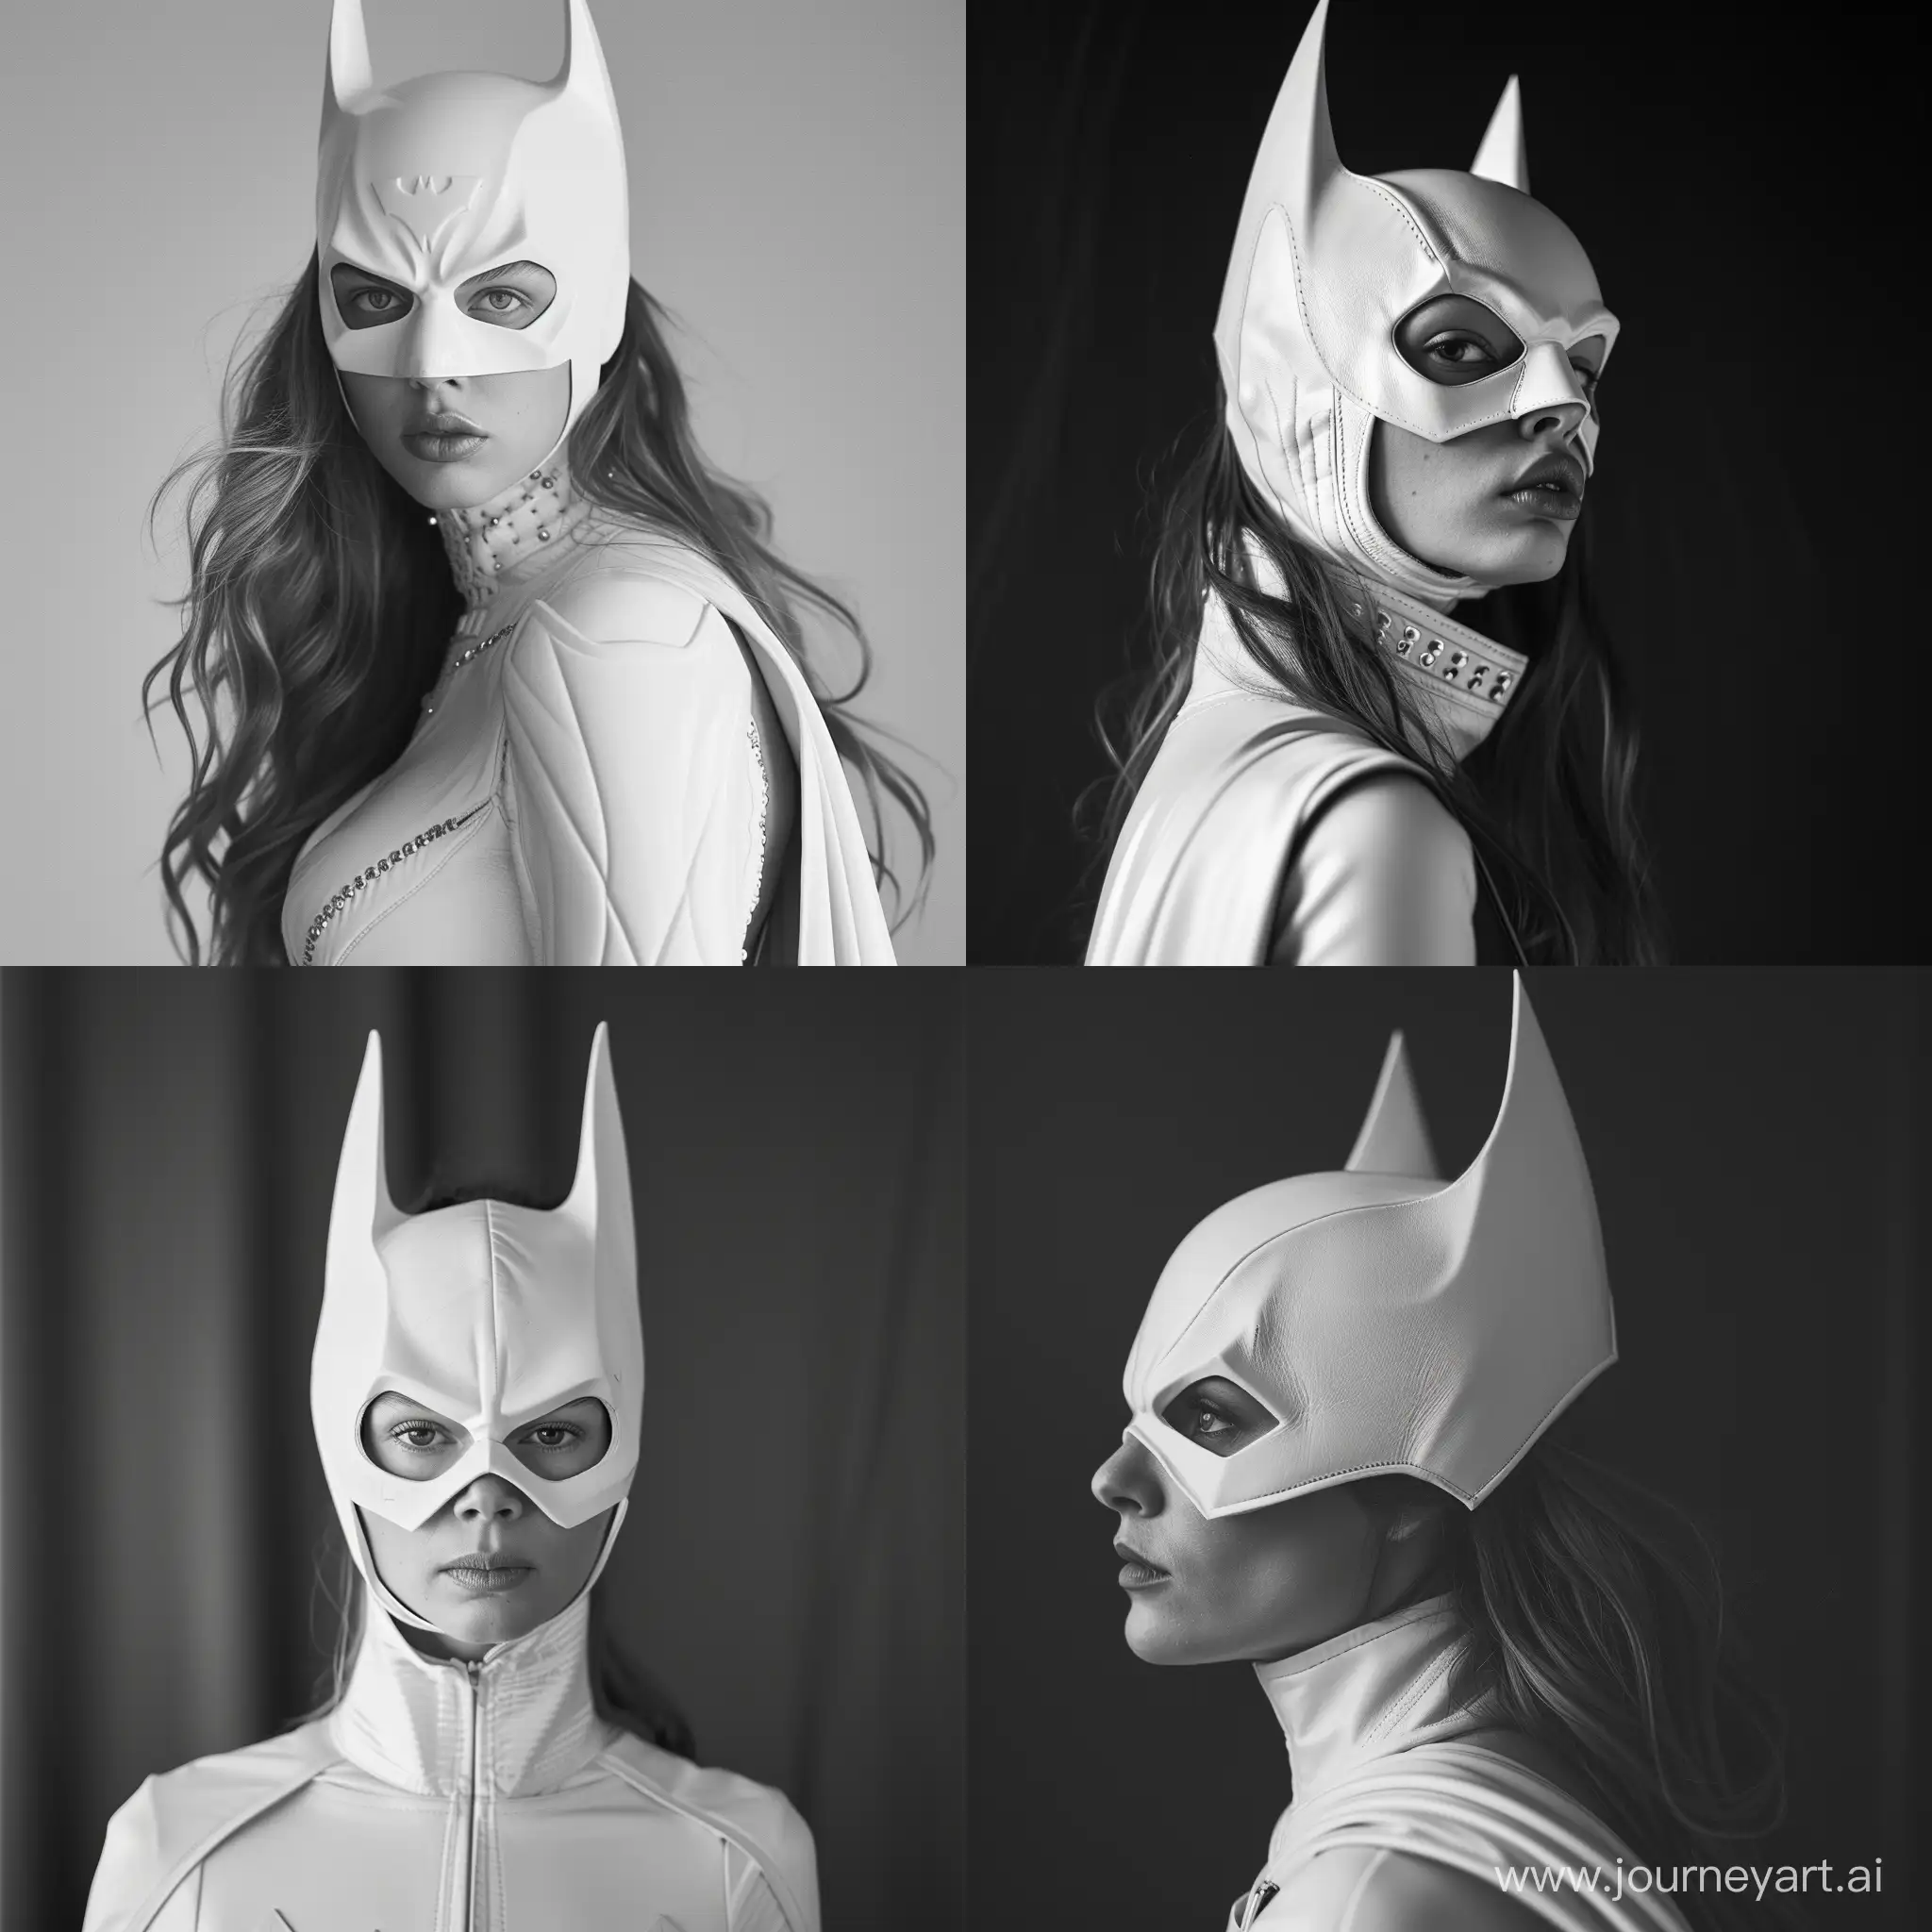 Batgirl-with-White-Sony-7-III-Camera-at-F-12-Aperture